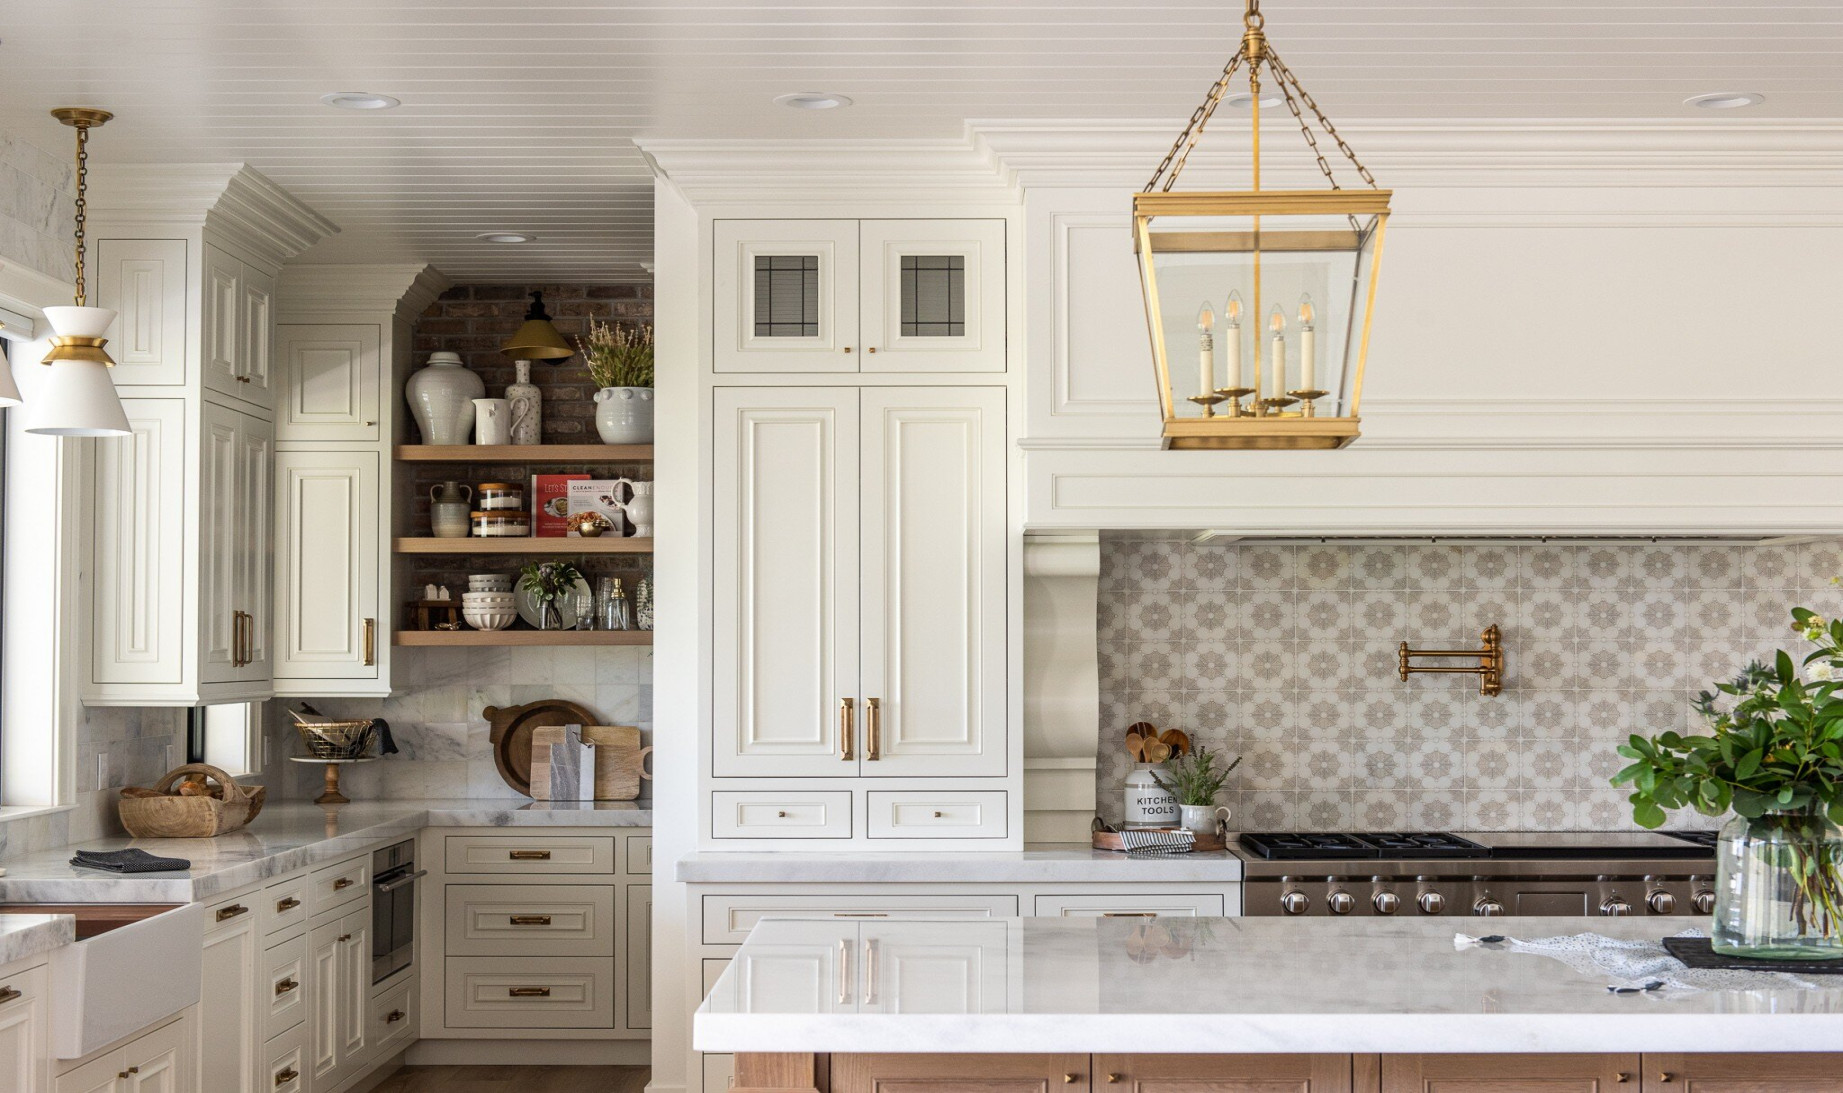 Is White Dove a Good Color for Kitchen Cabinets? - Amanda Katherine